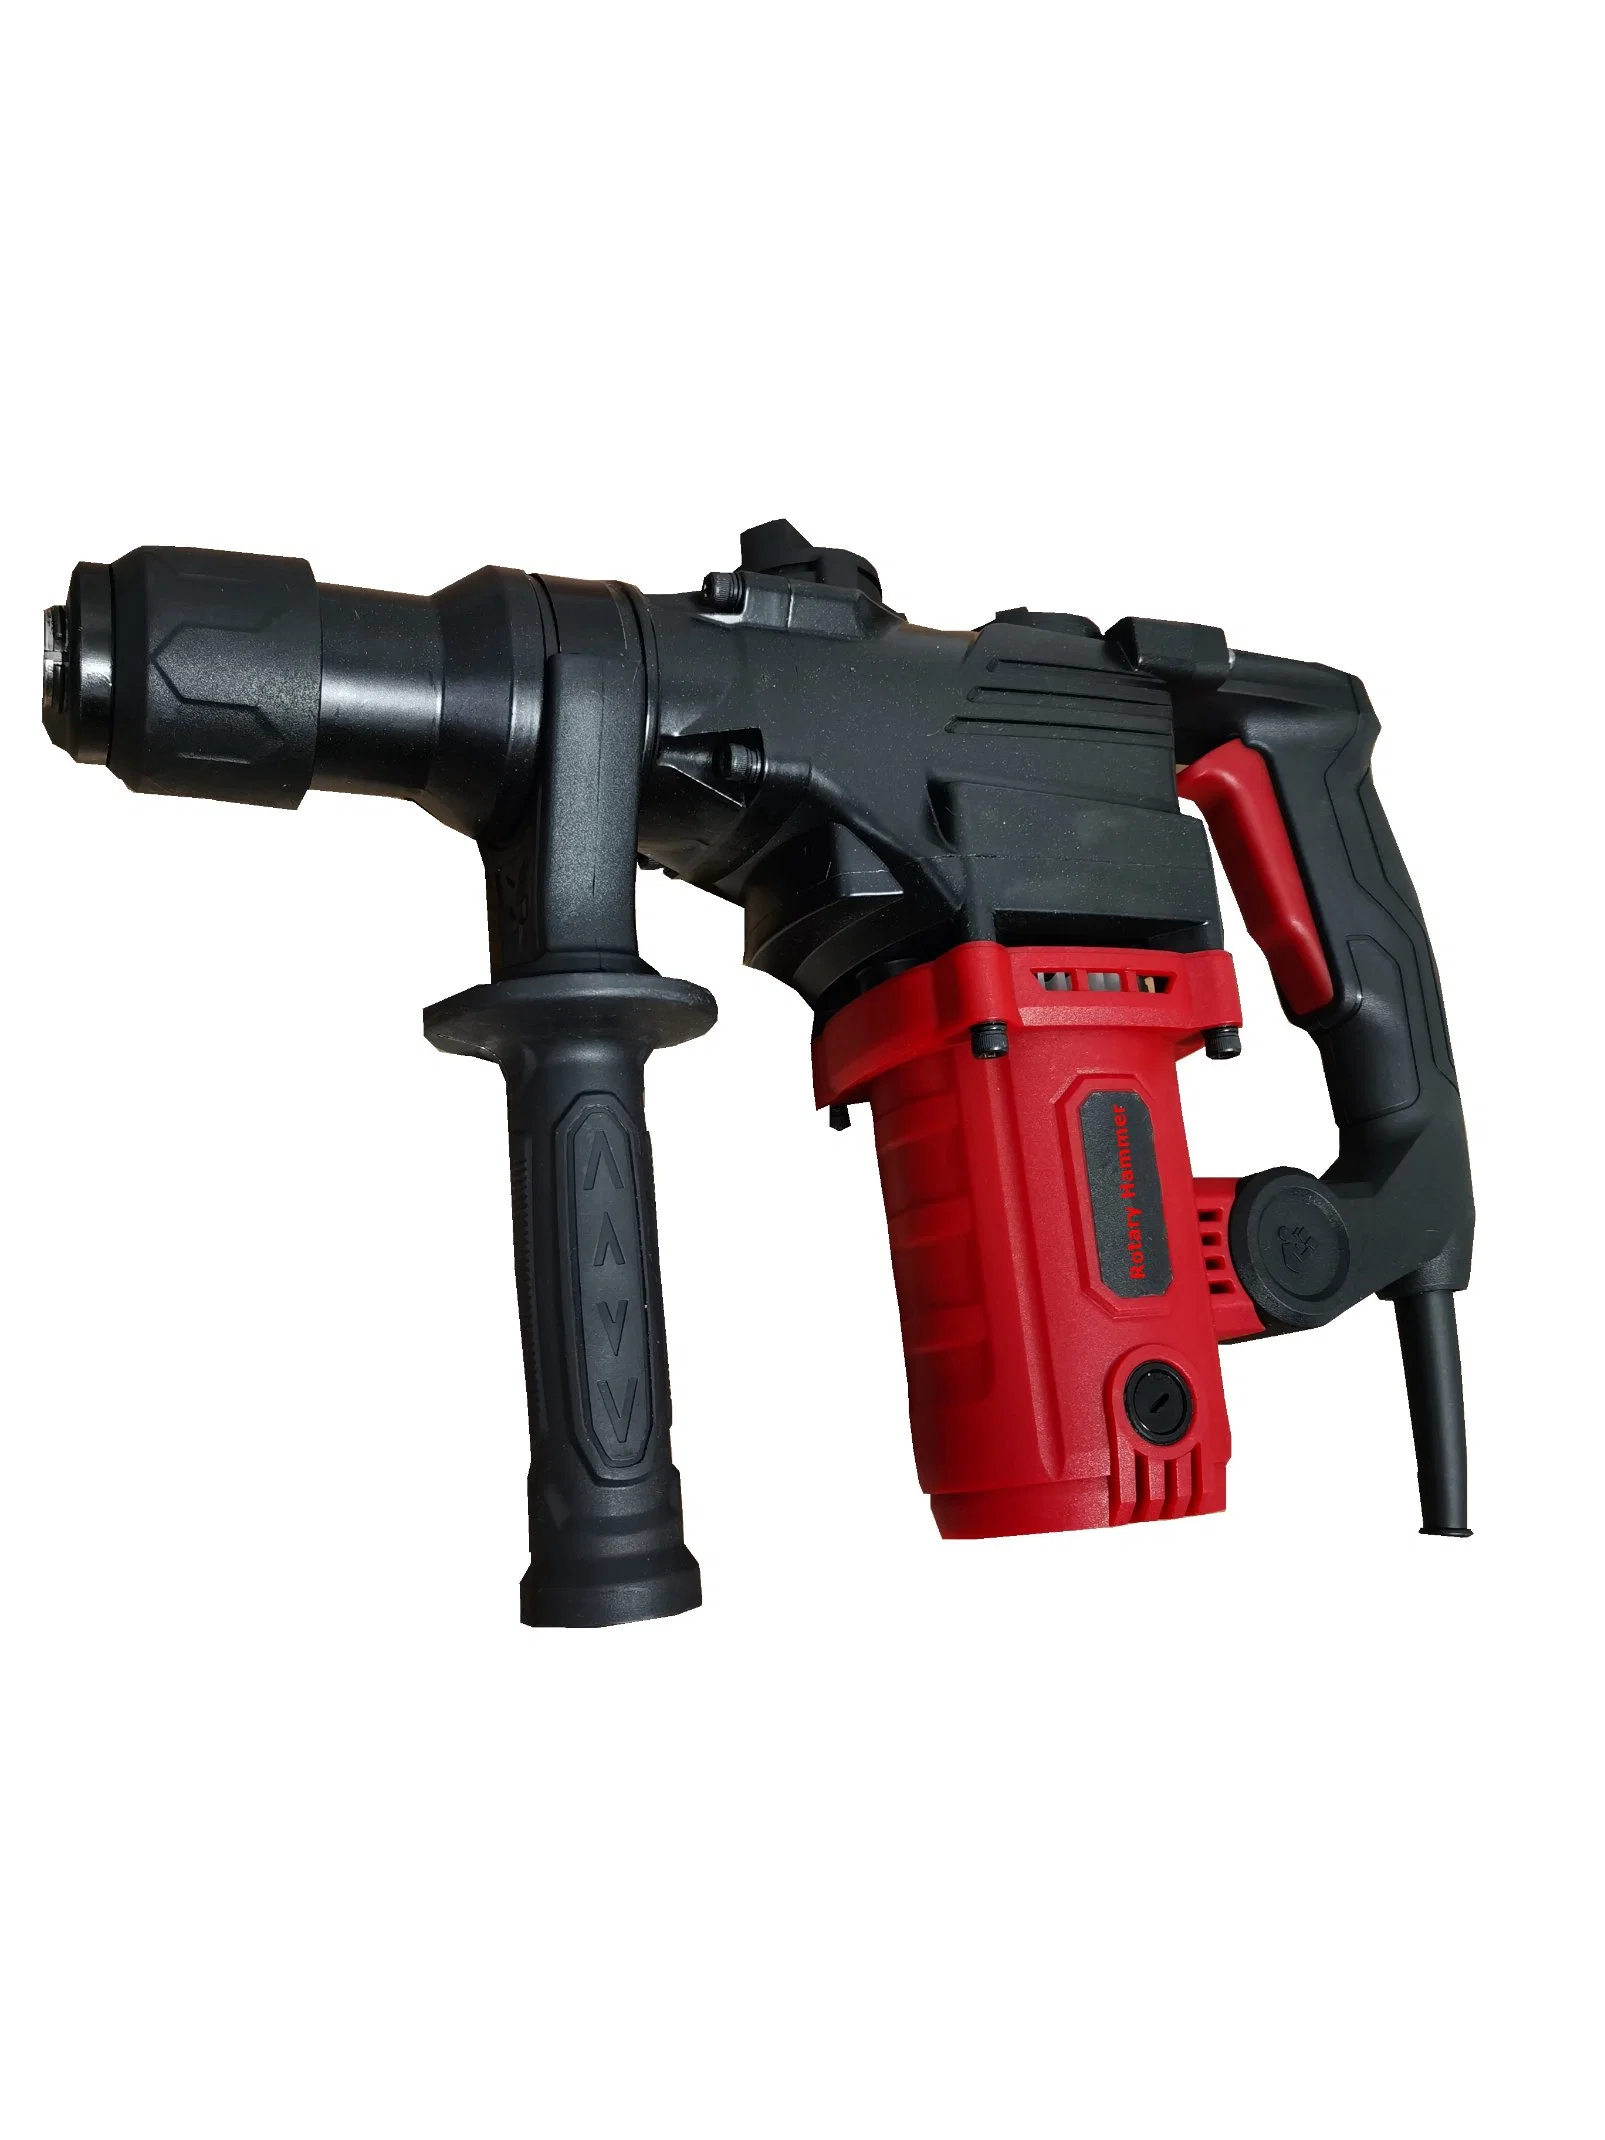 SDS Max 2 Function Electric Rotary Hammer 26mm Power Tools